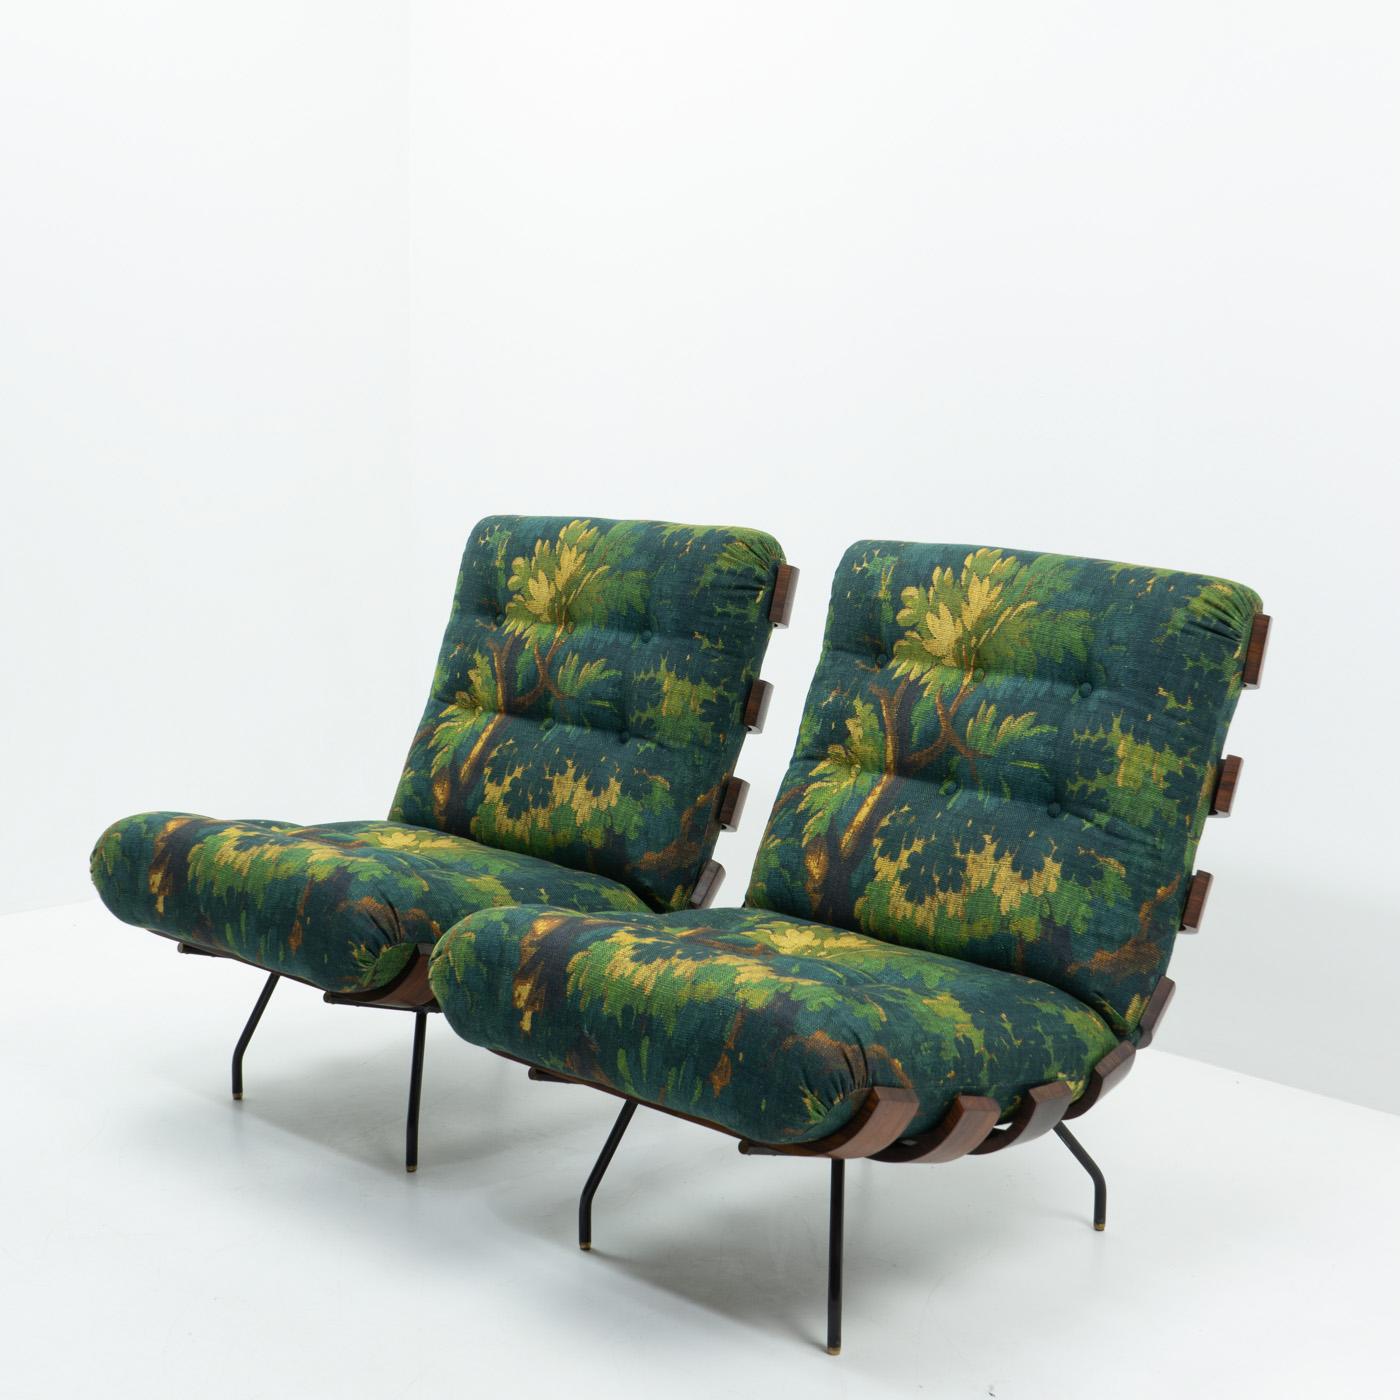 Italian Brazilian Design Costela Lounge Chairs by Hauner & Eisler for Forma, 1950s For Sale